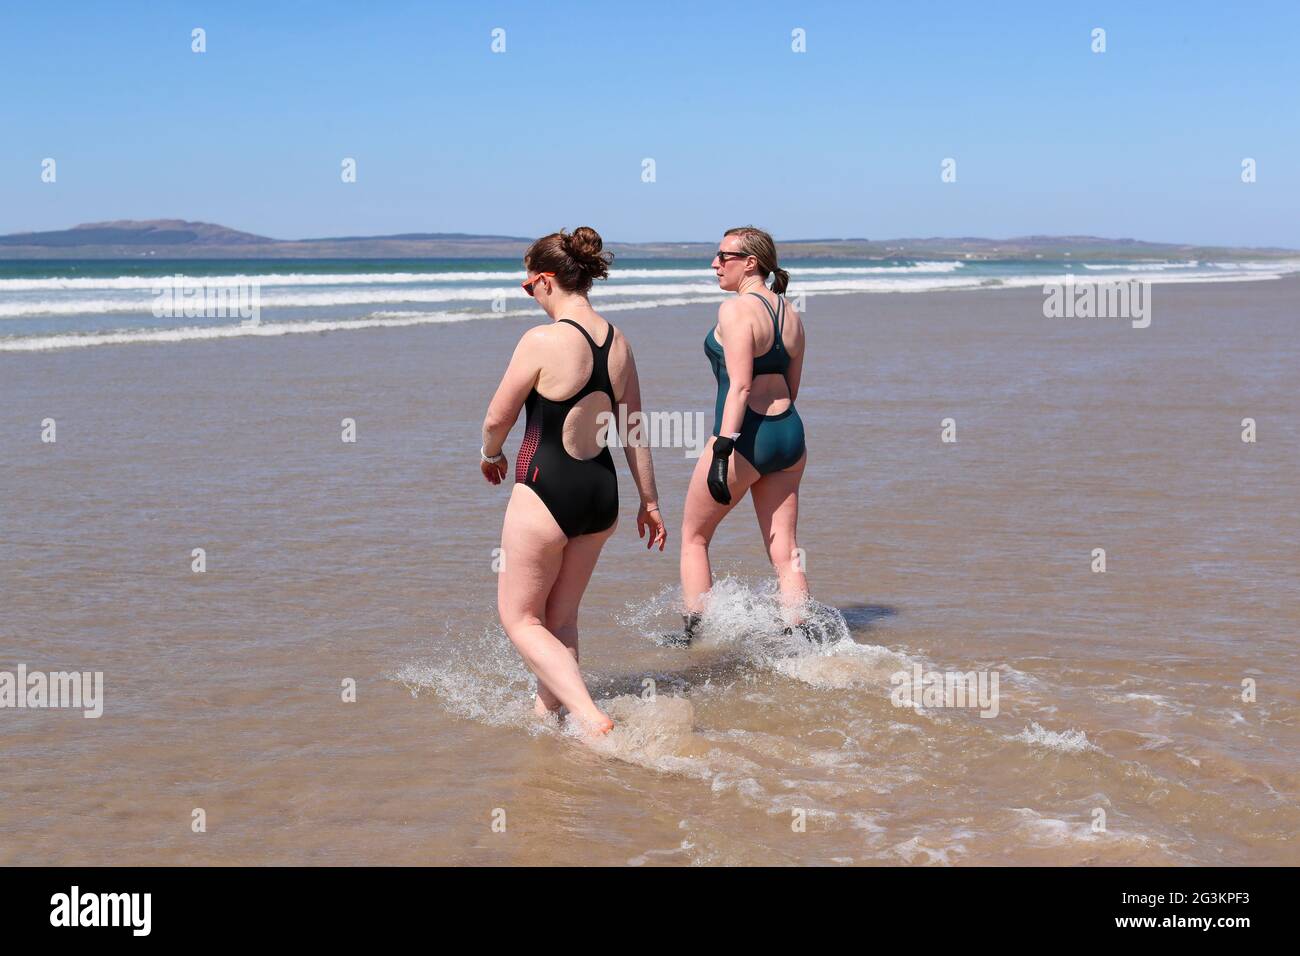 Women take part in open water swimming on the Isle of islay off Scotland's west coast during a staycation. Stock Photo